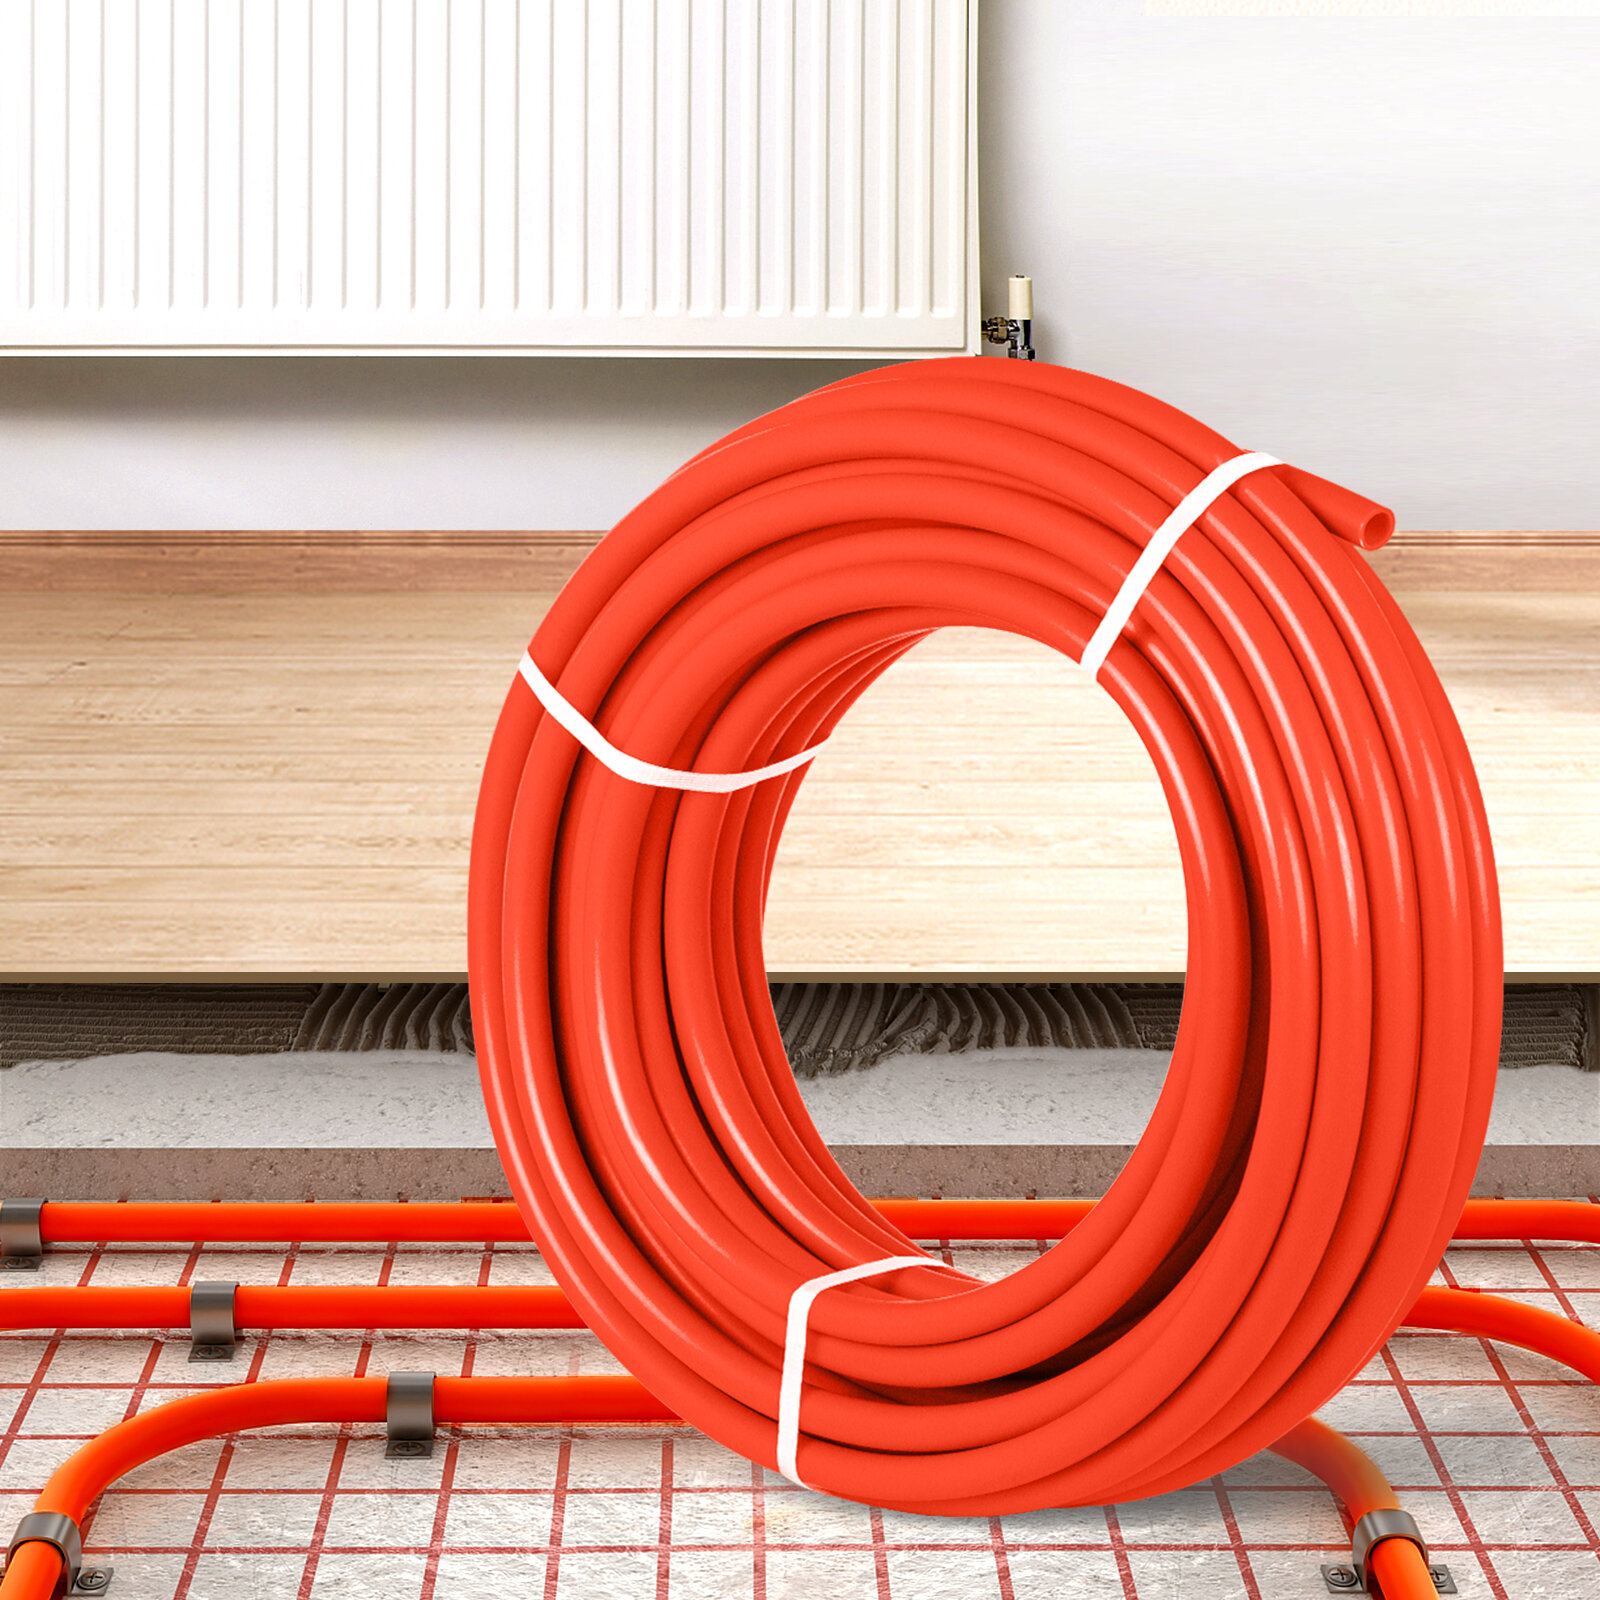 1/2" x 100' RED NON-BARRIER PEX PIPE FOR HOT AND COLD PLUMBING 